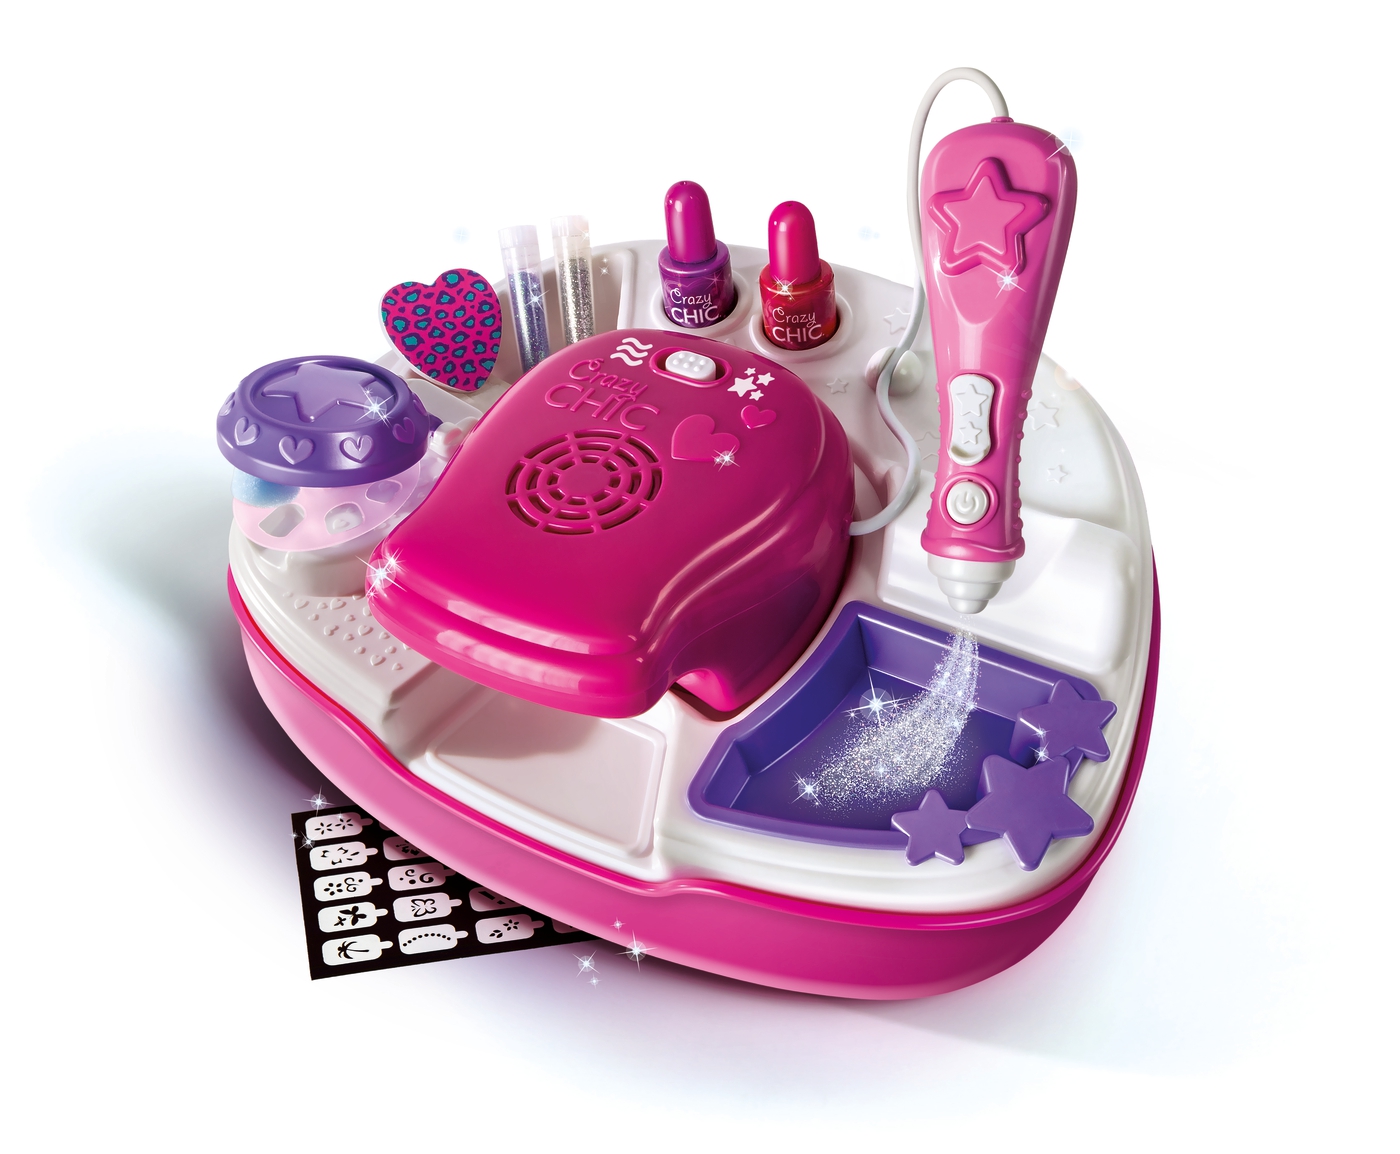 6. Nail Art Studio Toy with Accessories - wide 8